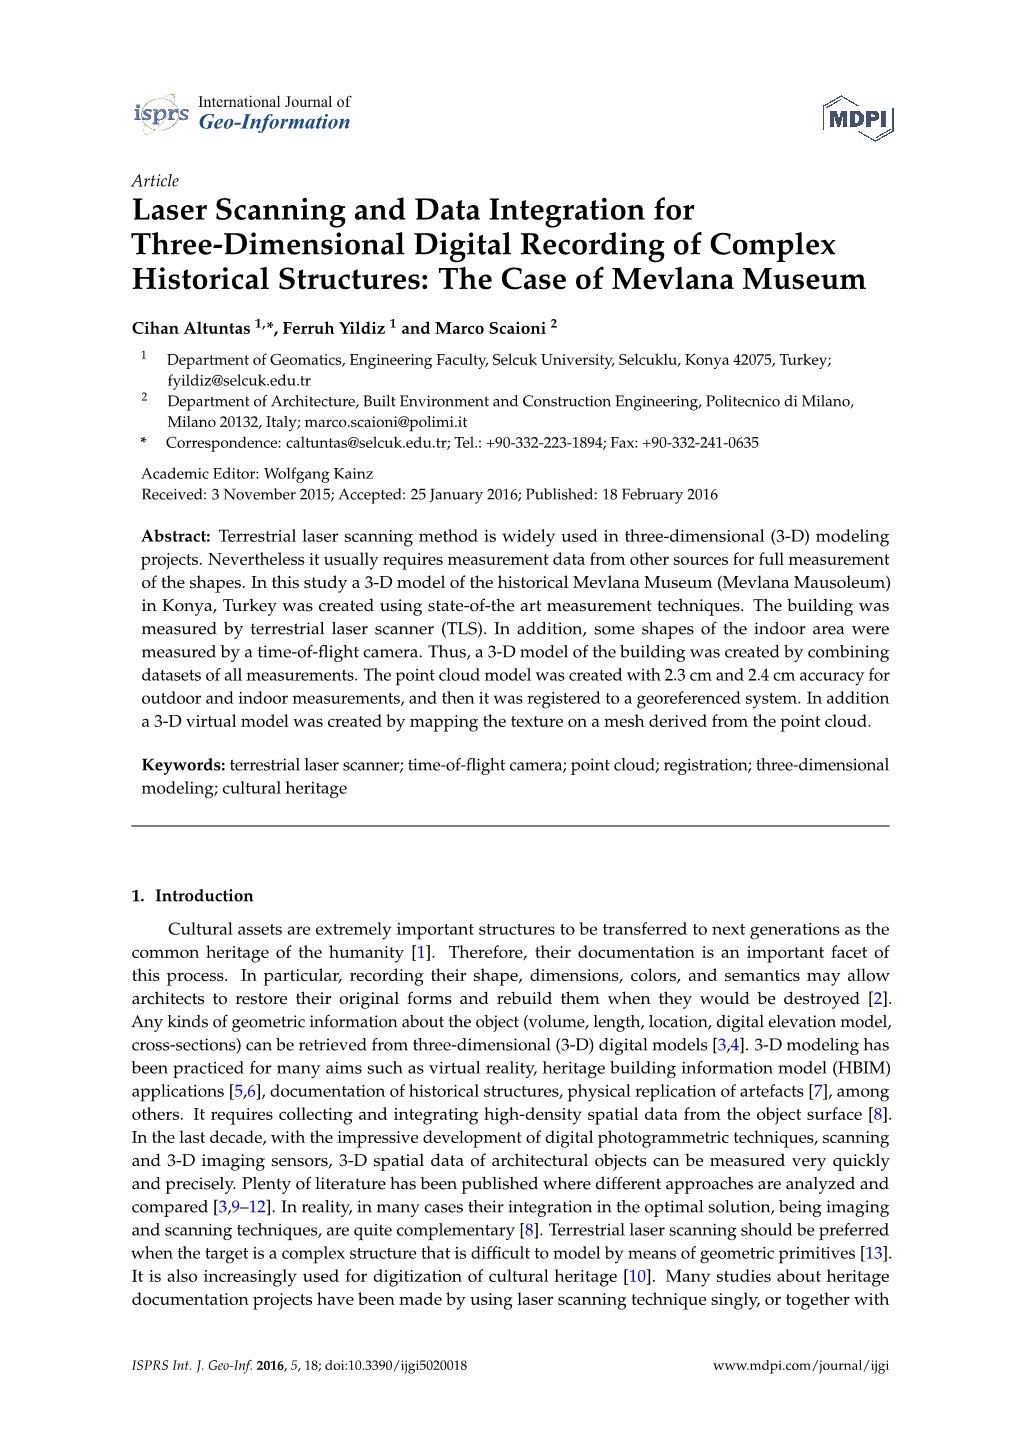 Laser Scanning and Data Integration for Three-Dimensional Digital Recording of Complex Historical Structures: the Case of Mevlana Museum